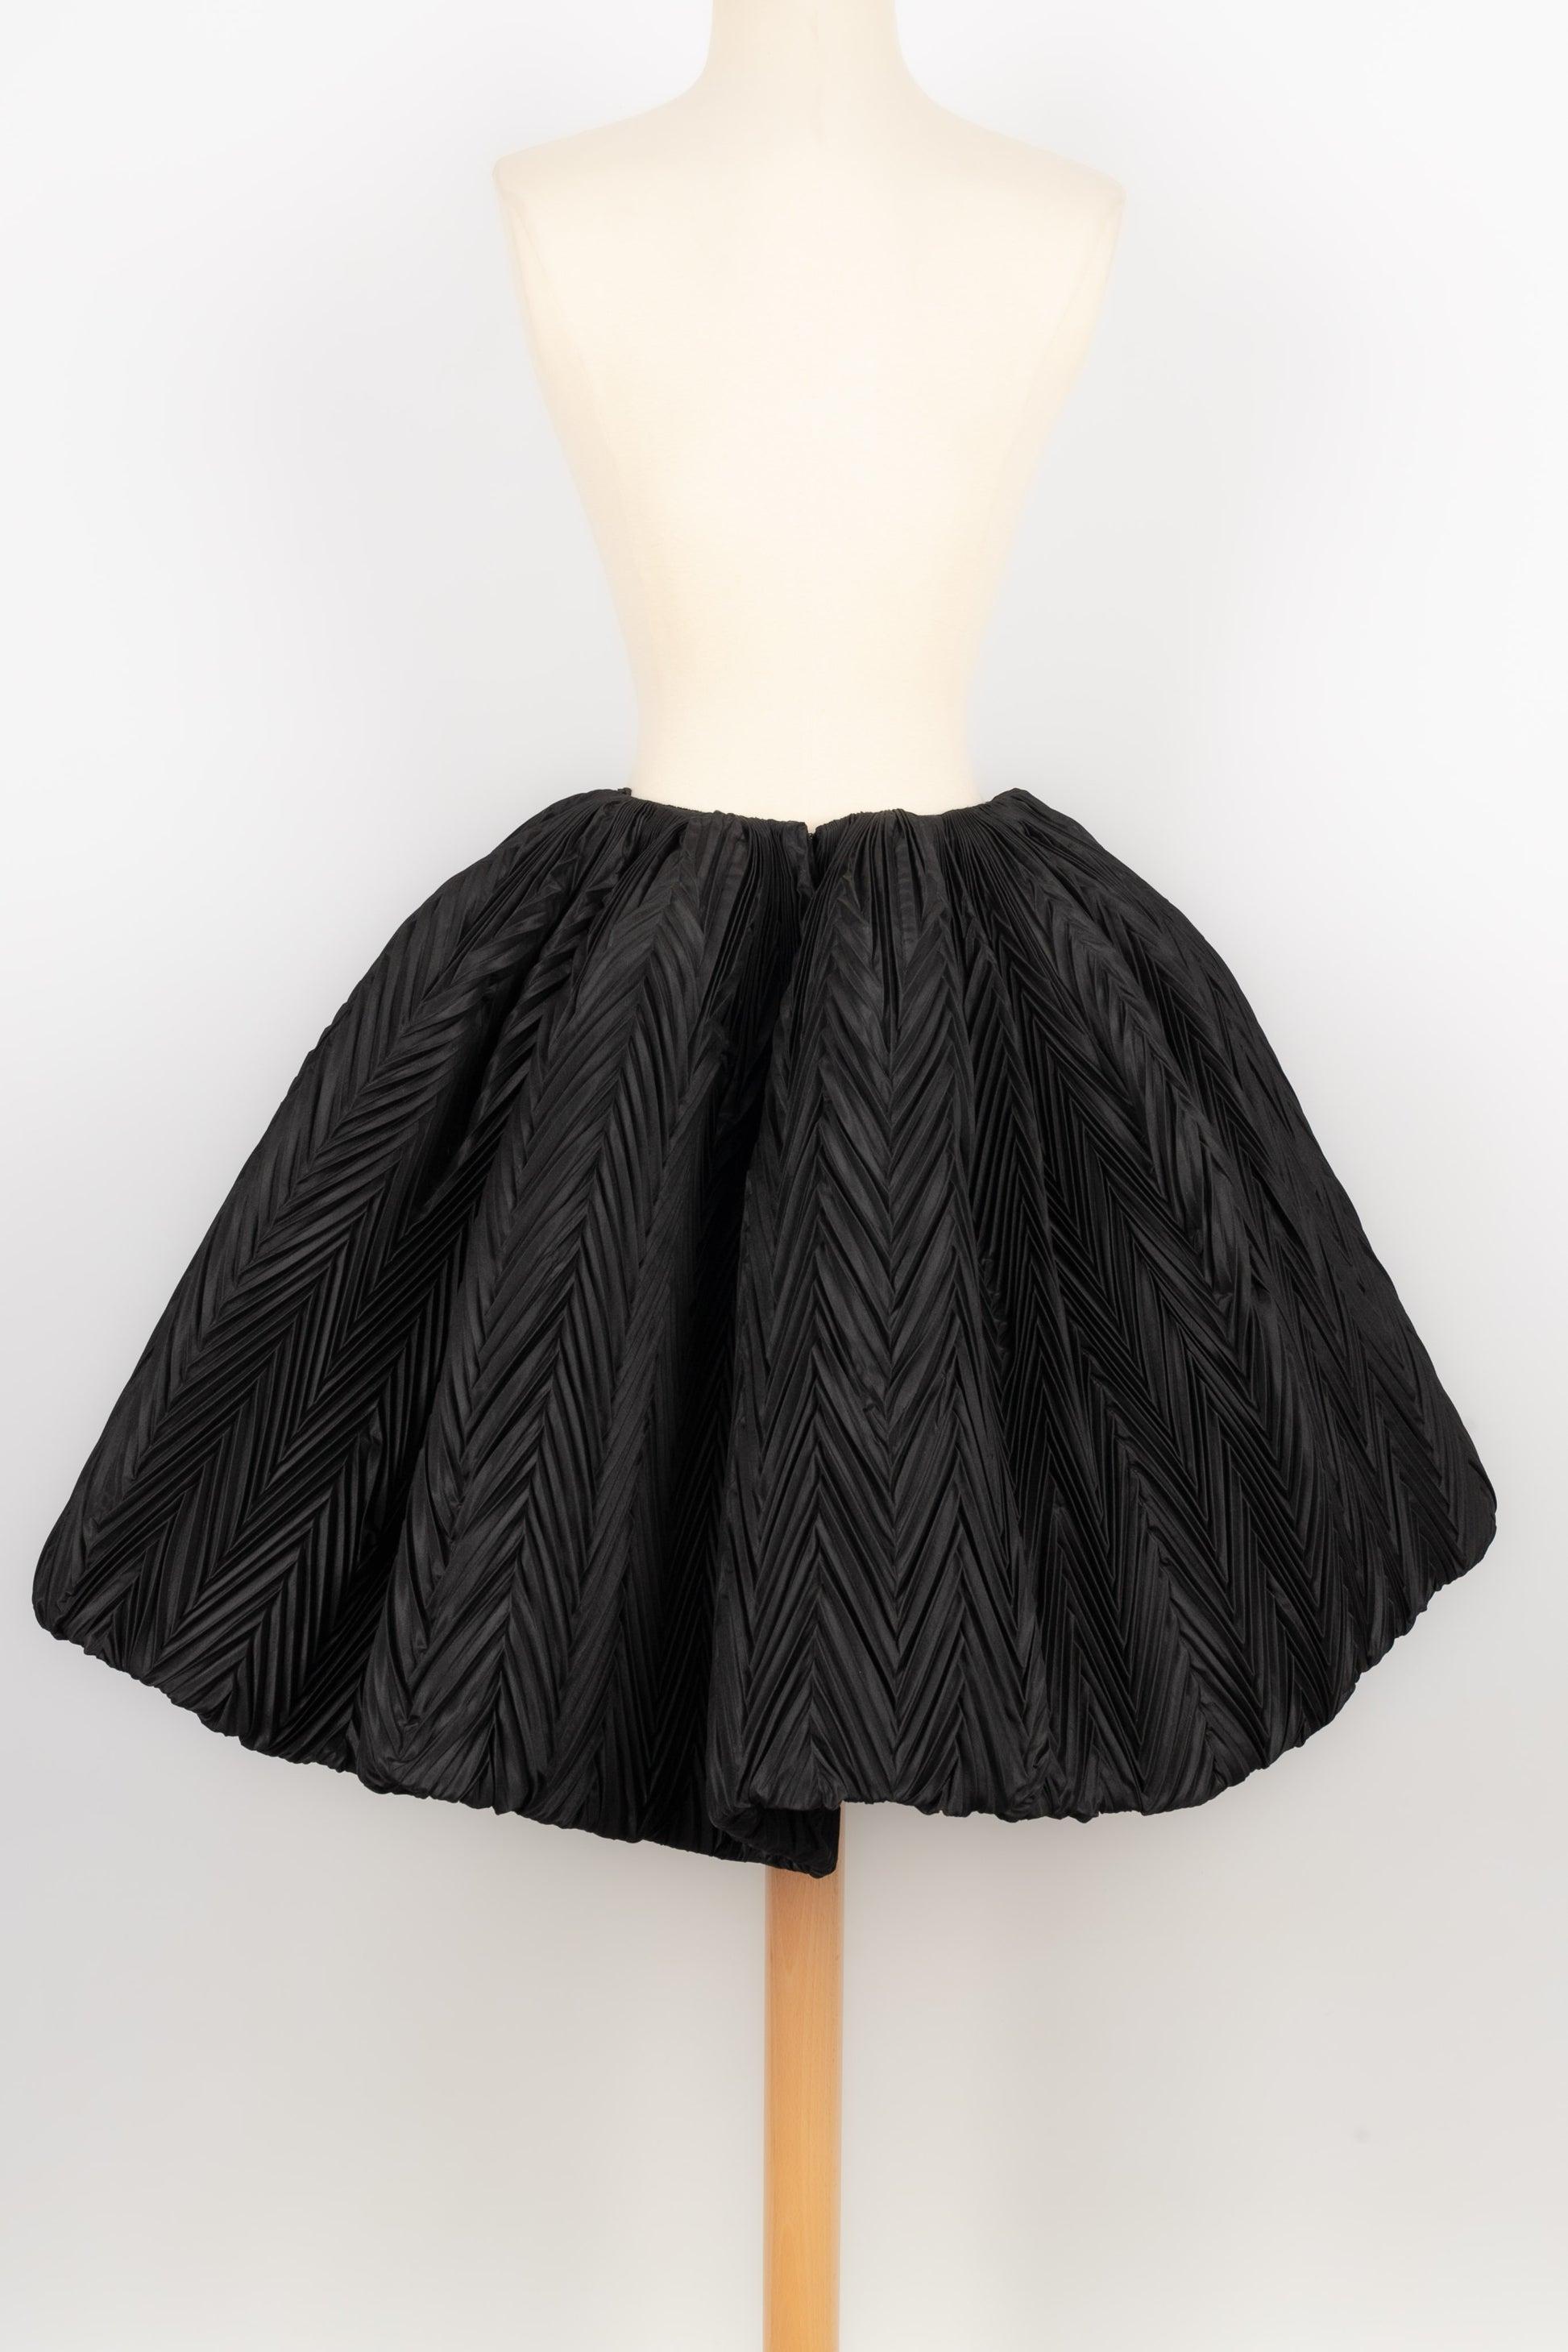 Nina Ricci Haute Couture Circle Skirt Covered with Black Taffeta In Excellent Condition For Sale In SAINT-OUEN-SUR-SEINE, FR